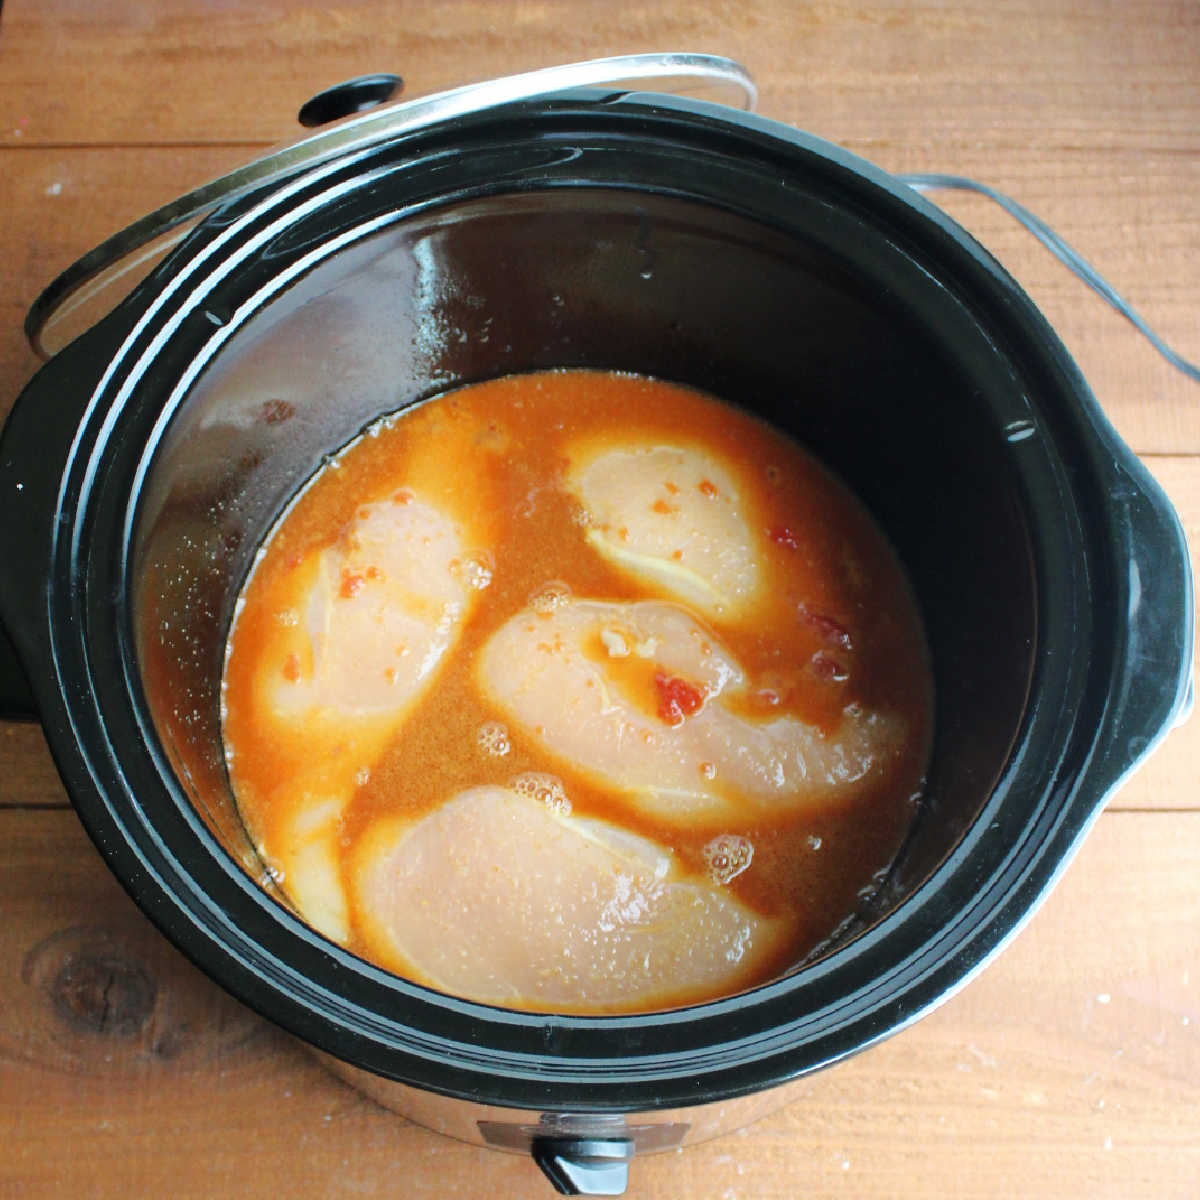 raw chicken breasts in honey based sauce in slow cooker, ready to cook.